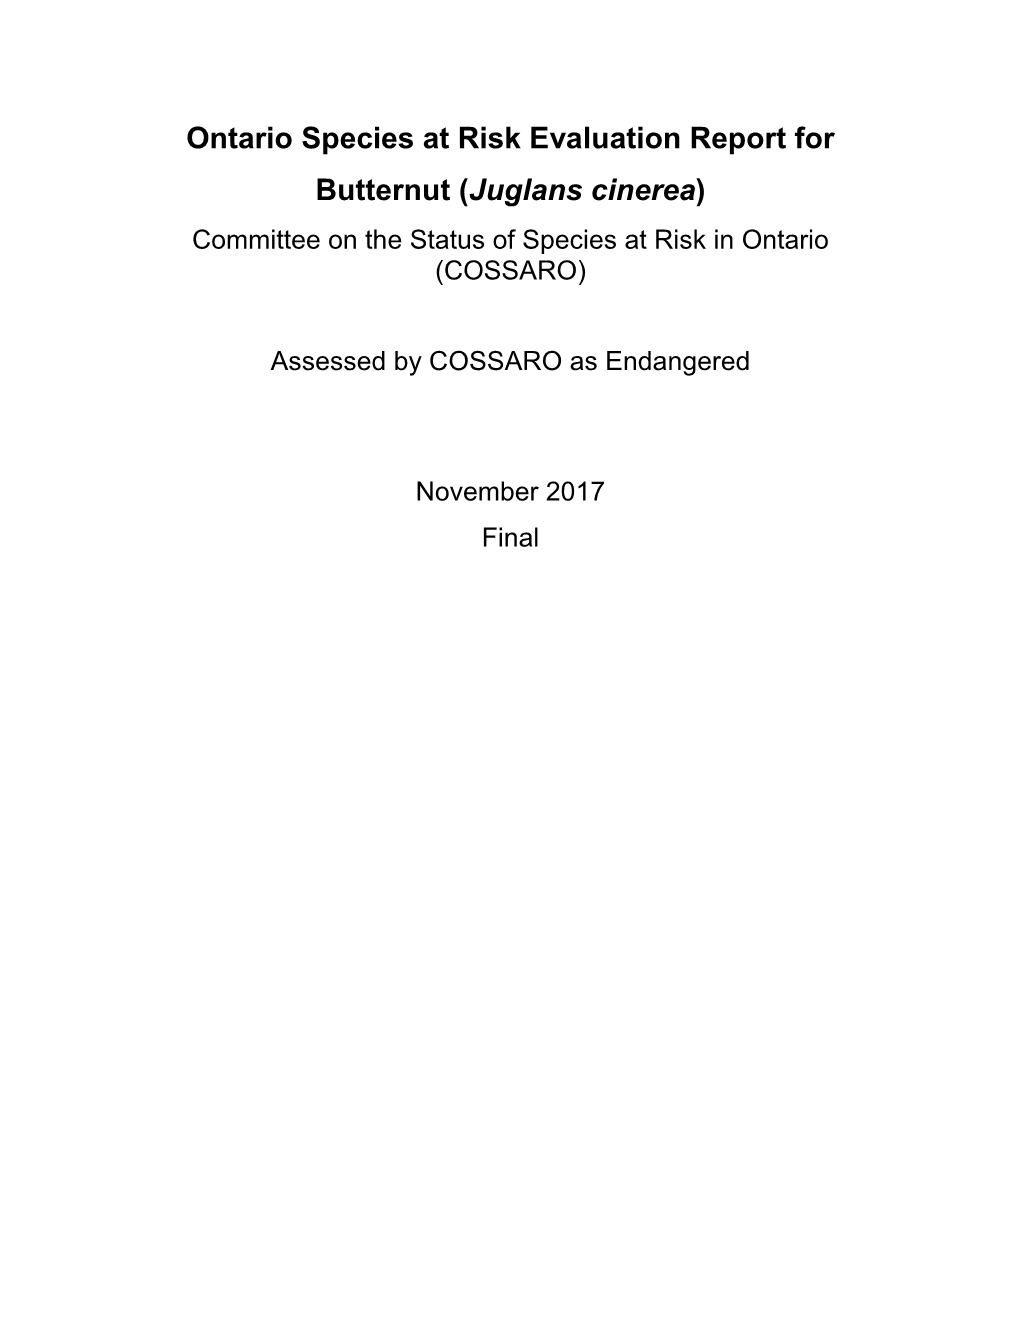 Ontario Species at Risk Evaluation Report for Butternut (Juglans Cinerea) Committee on the Status of Species at Risk in Ontario (COSSARO)